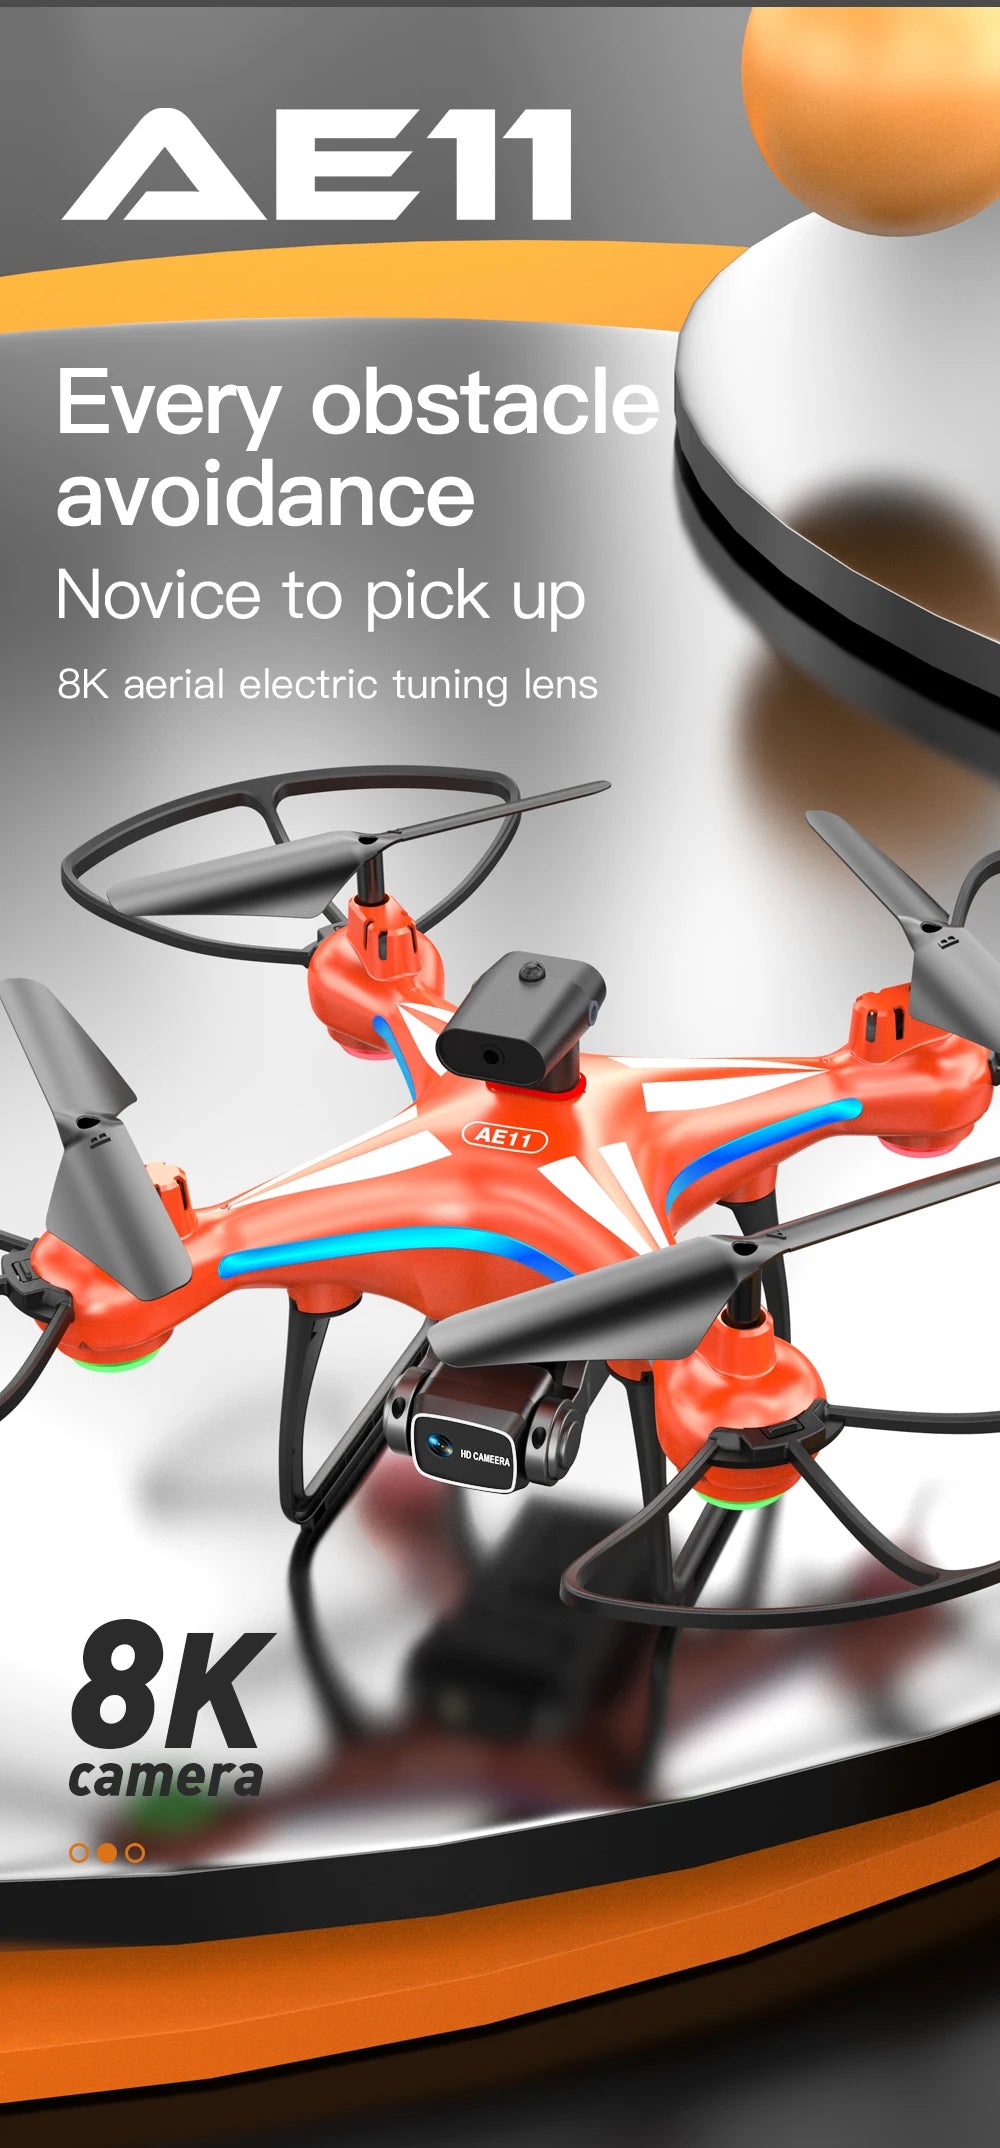 AE11 Drone, every obstacle avoidance novice to pick up 8k aerial electric tuning lens